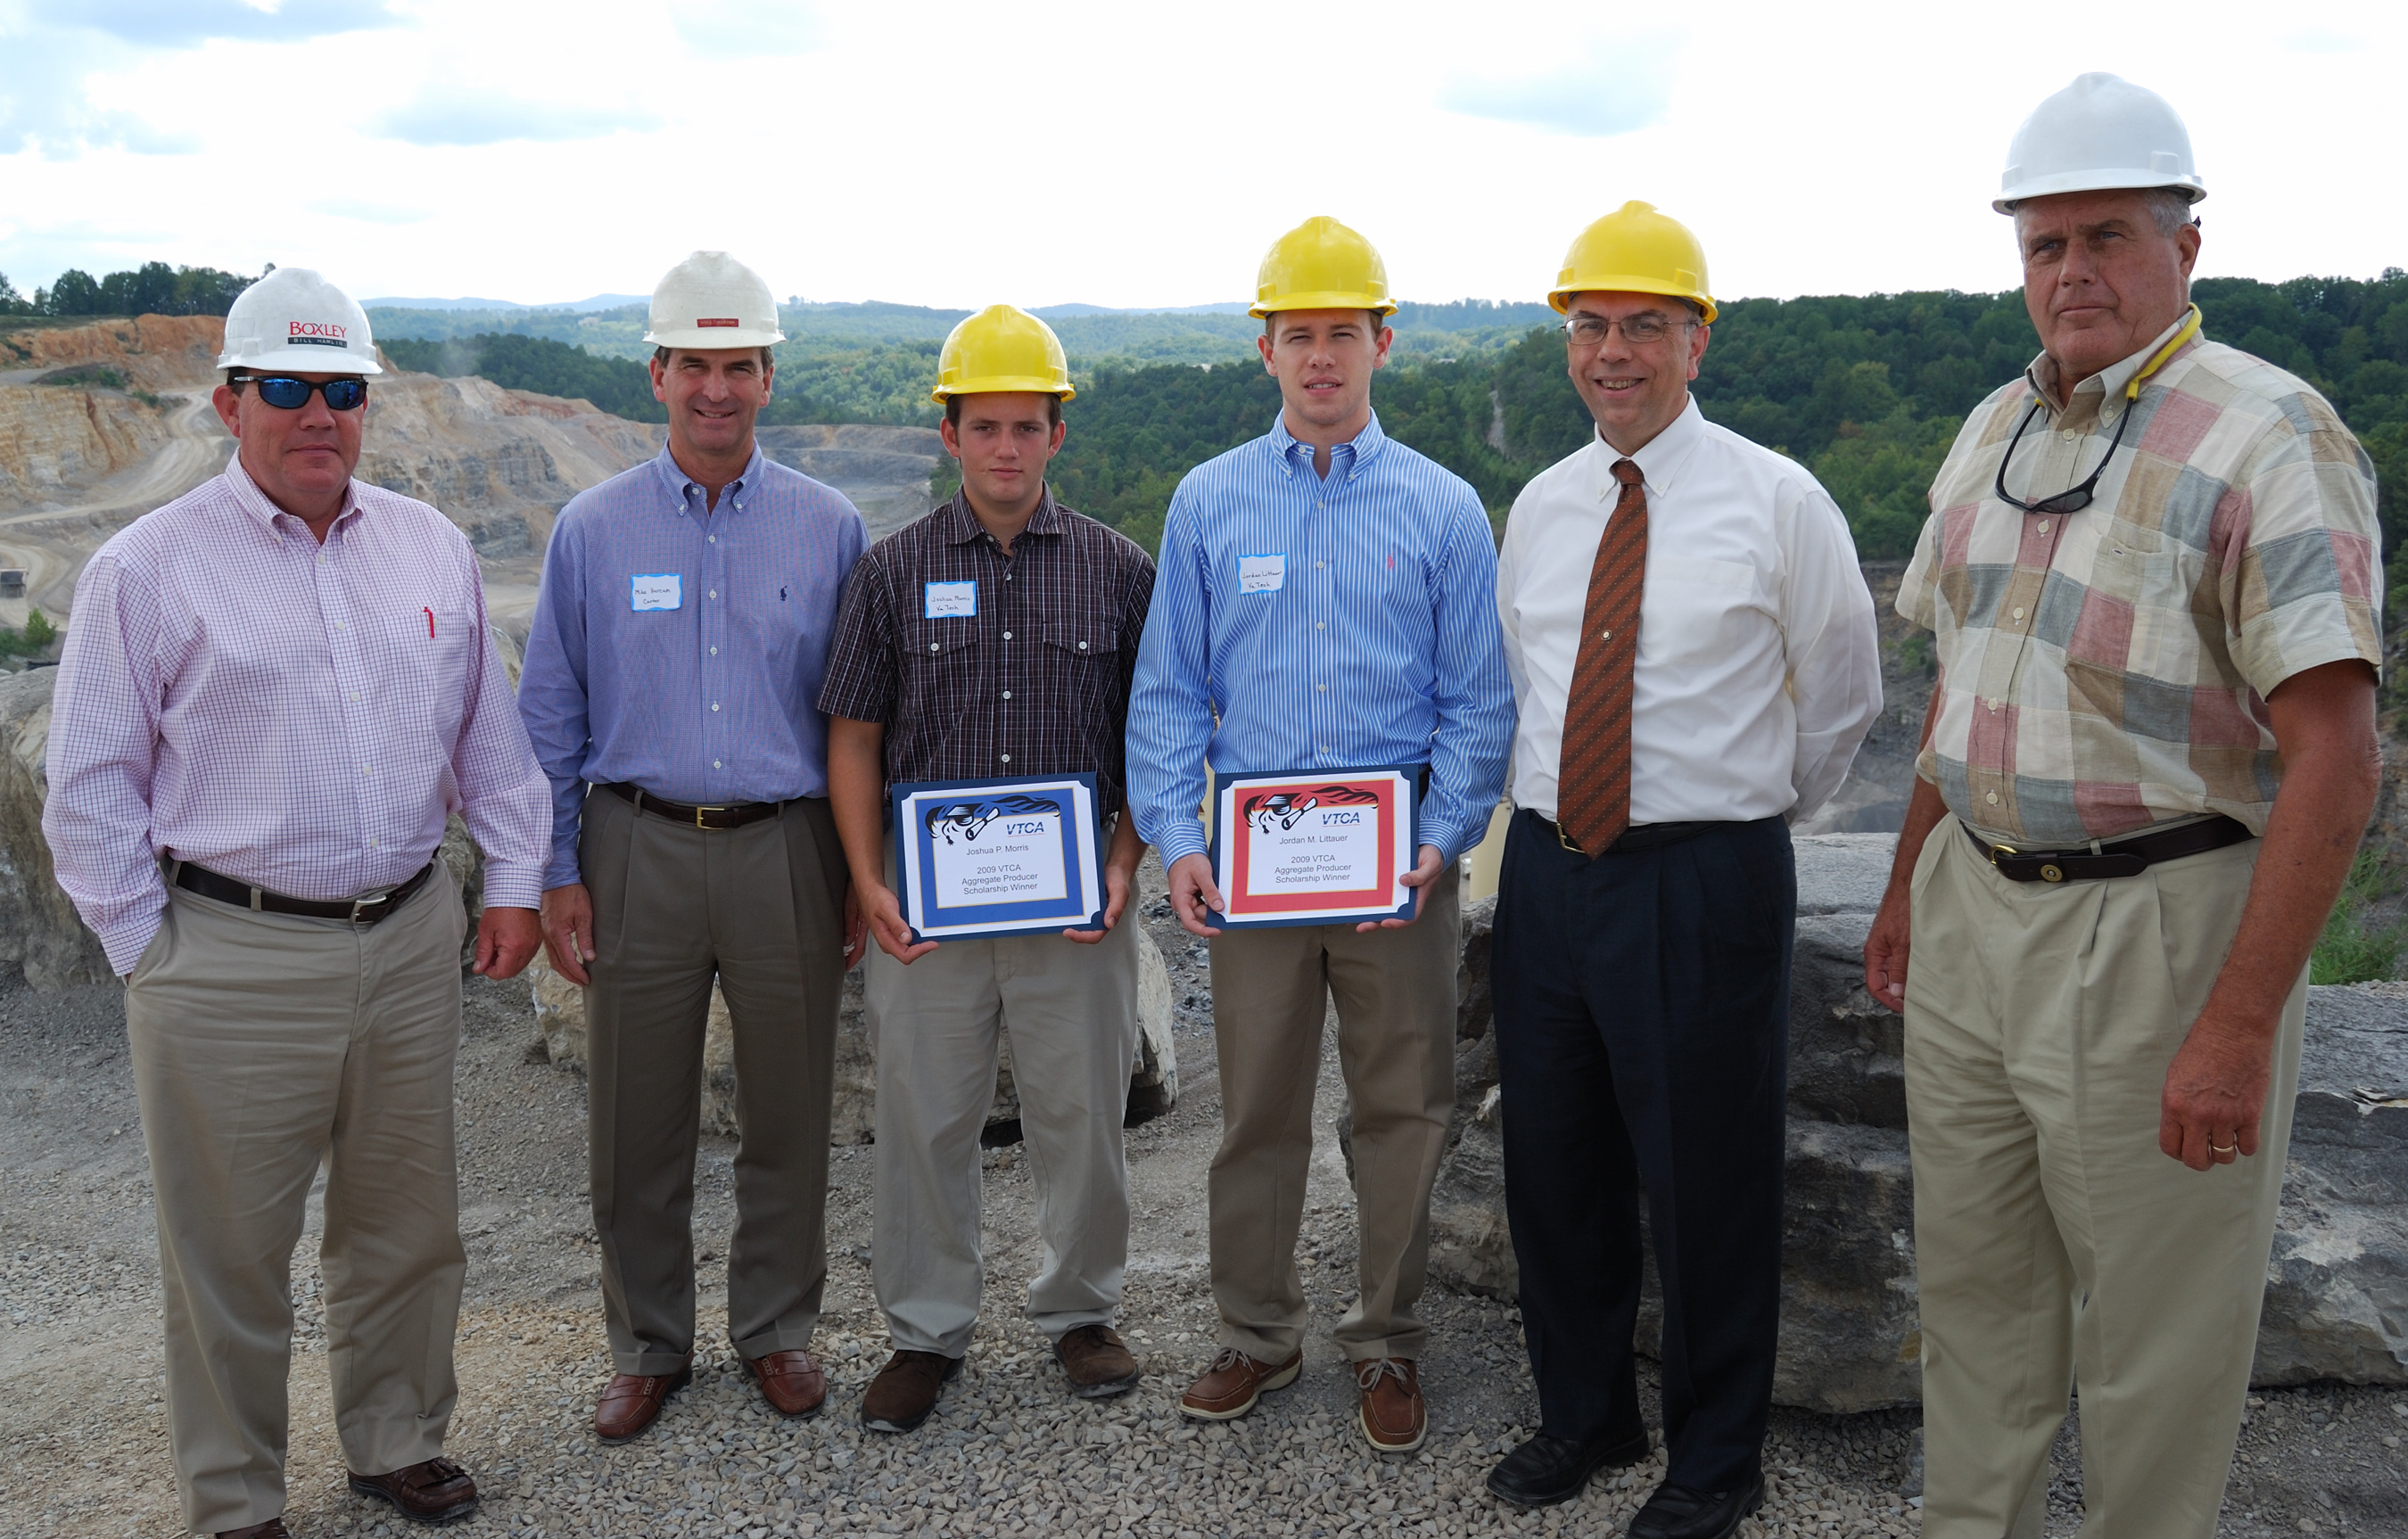 (Left to right)Bill Hamlin, Boxley Materials Co.; Mike Harcum, Carter Machinery; Joshua Morris; Jordan Littauer; Greg Adel, professor and mining and minerals engineering department chairman at Virginia Tech; and M.J. O'Brien Jr., president of Salem Stone. Hamlin, Harcum and O'Brien are members of the Virginia Transportation Construction Alliance, which awarded Morris and Littauer scholarships.